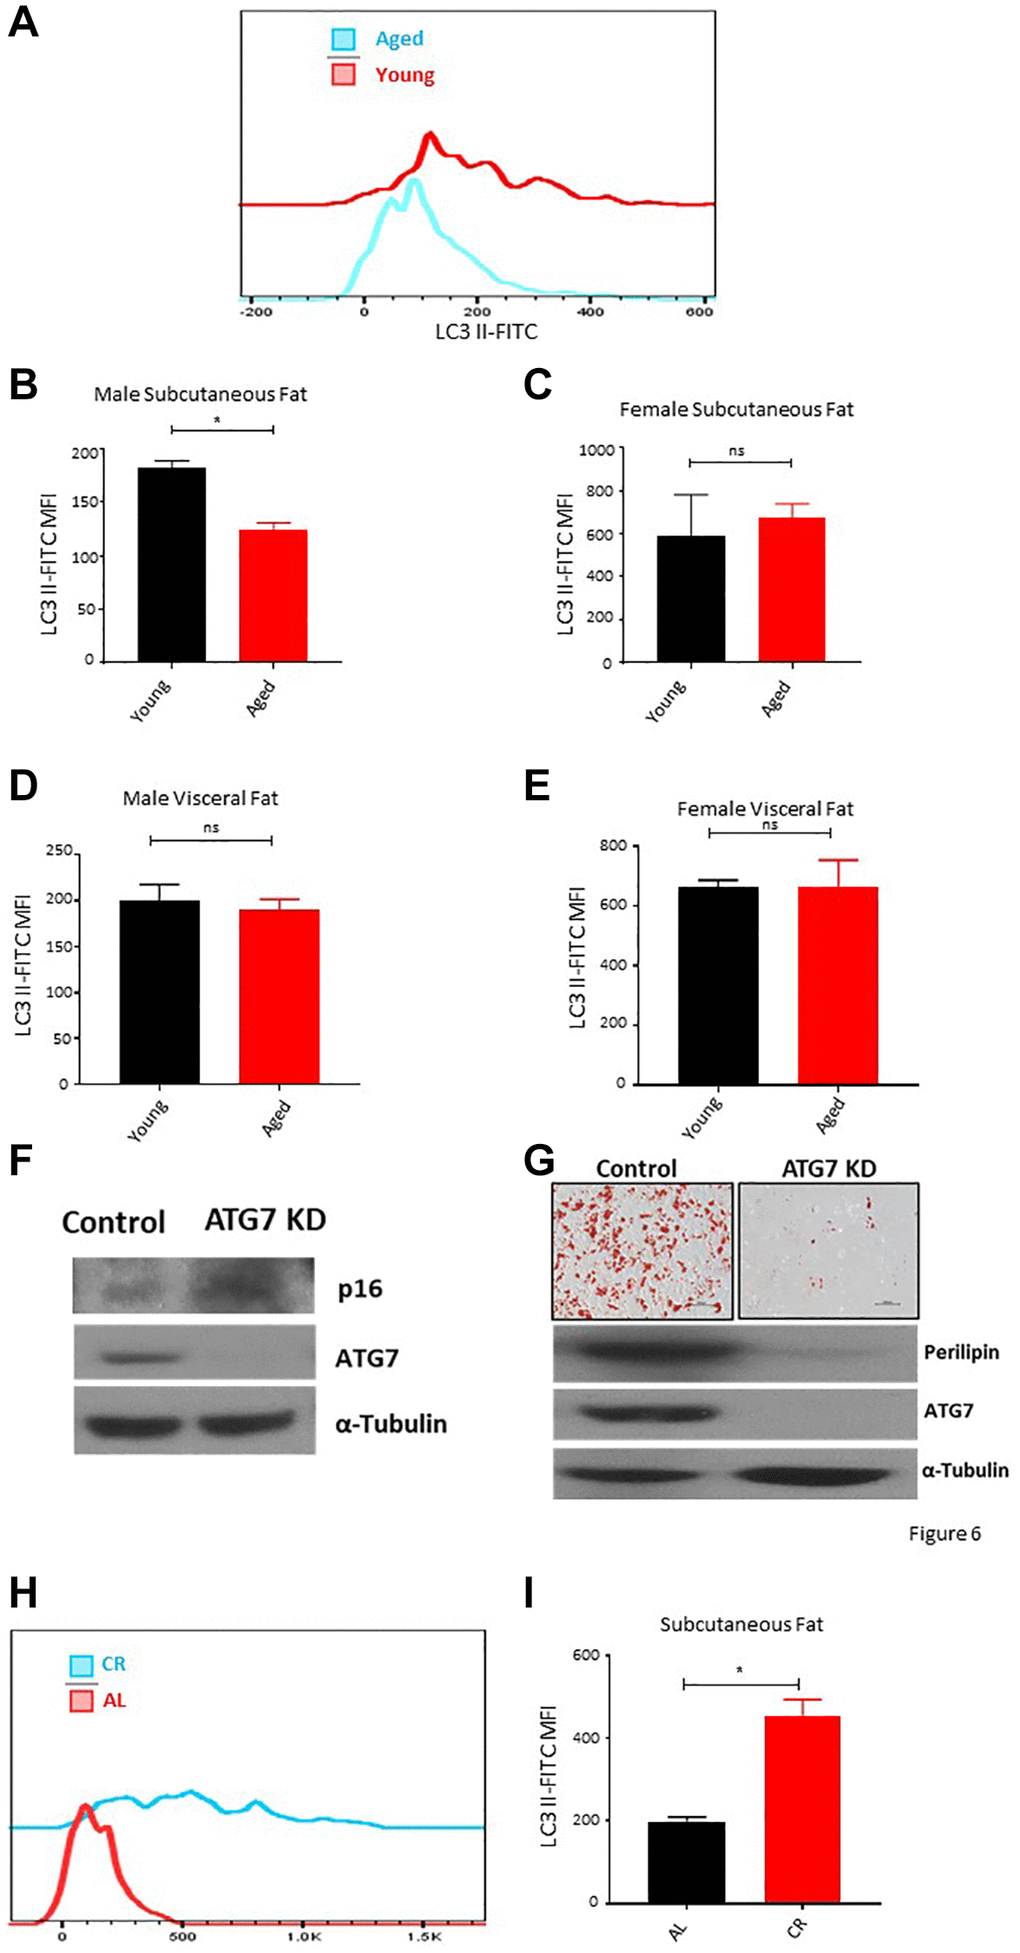 Aging is associated with autophagy defects in ASCs. (A) Representative histogram of autophagy marker LC3 II fluorescence among ASCs from young and aged mice. (B, C) The mean fluorescence intensity distribution of LC3 II in subcutaneous ASCs from young and aged male (B) and female (C) mice. (D, E) The mean fluorescence intensity distribution of LC3 II in visceral ASCs from young and aged male (D) and female (E) mice. (F) Western blot of ASCs lysate from control and ATG7 KO mice. Blots were developed for p16, ATG7, and α-Tubulin. (G) ASCs isolated from control and ATG7 KO mice were differentiated and stained with Oil-Red-O. Differentiated ASCs lysate was blotted for perilipin, ATG7, and α-Tubulin expression. (H, I) The mean fluorescence intensity distribution of LC3 II in subcutaneous ASCs from mice fed on caloric restricted and ad-libitum diet. (n = 3–5 mice per group) P value *, ns = non-significant.